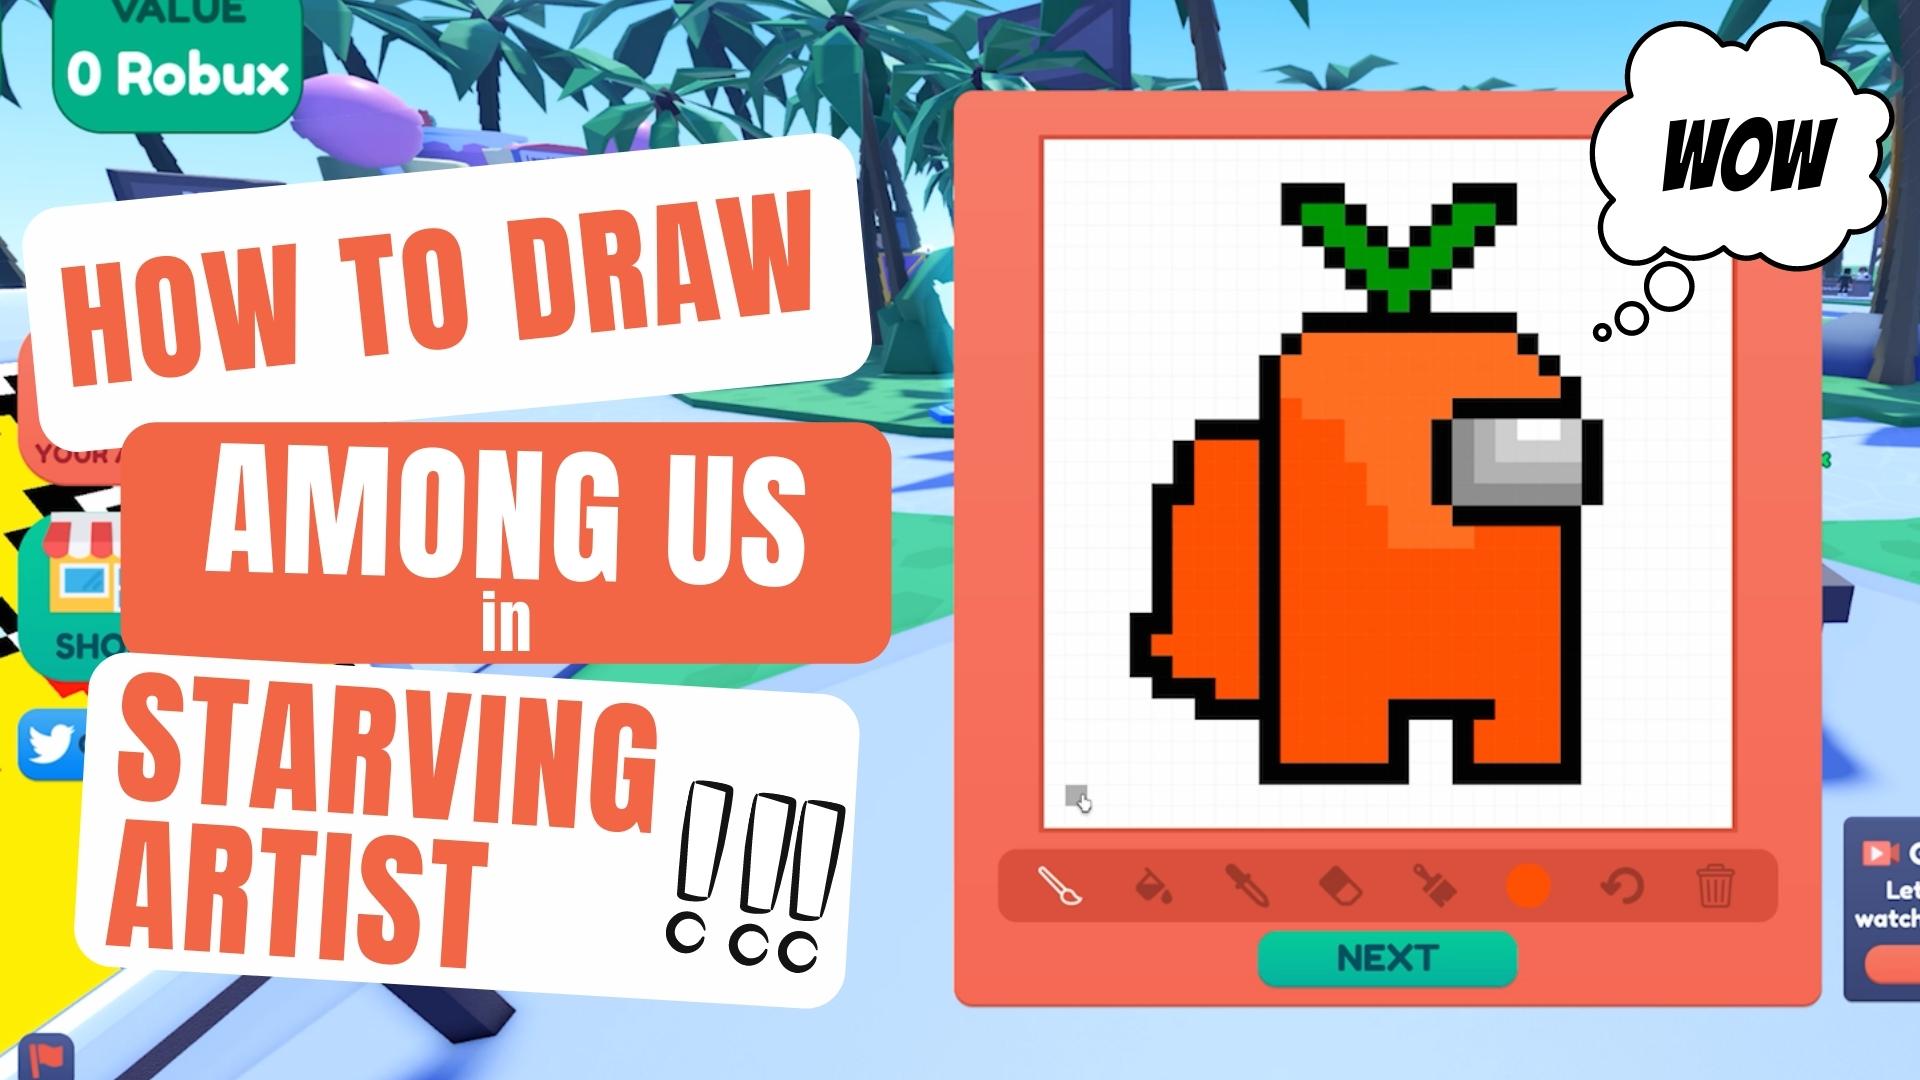 How To Draw Among us in Roblox Starving Artist (step by step)